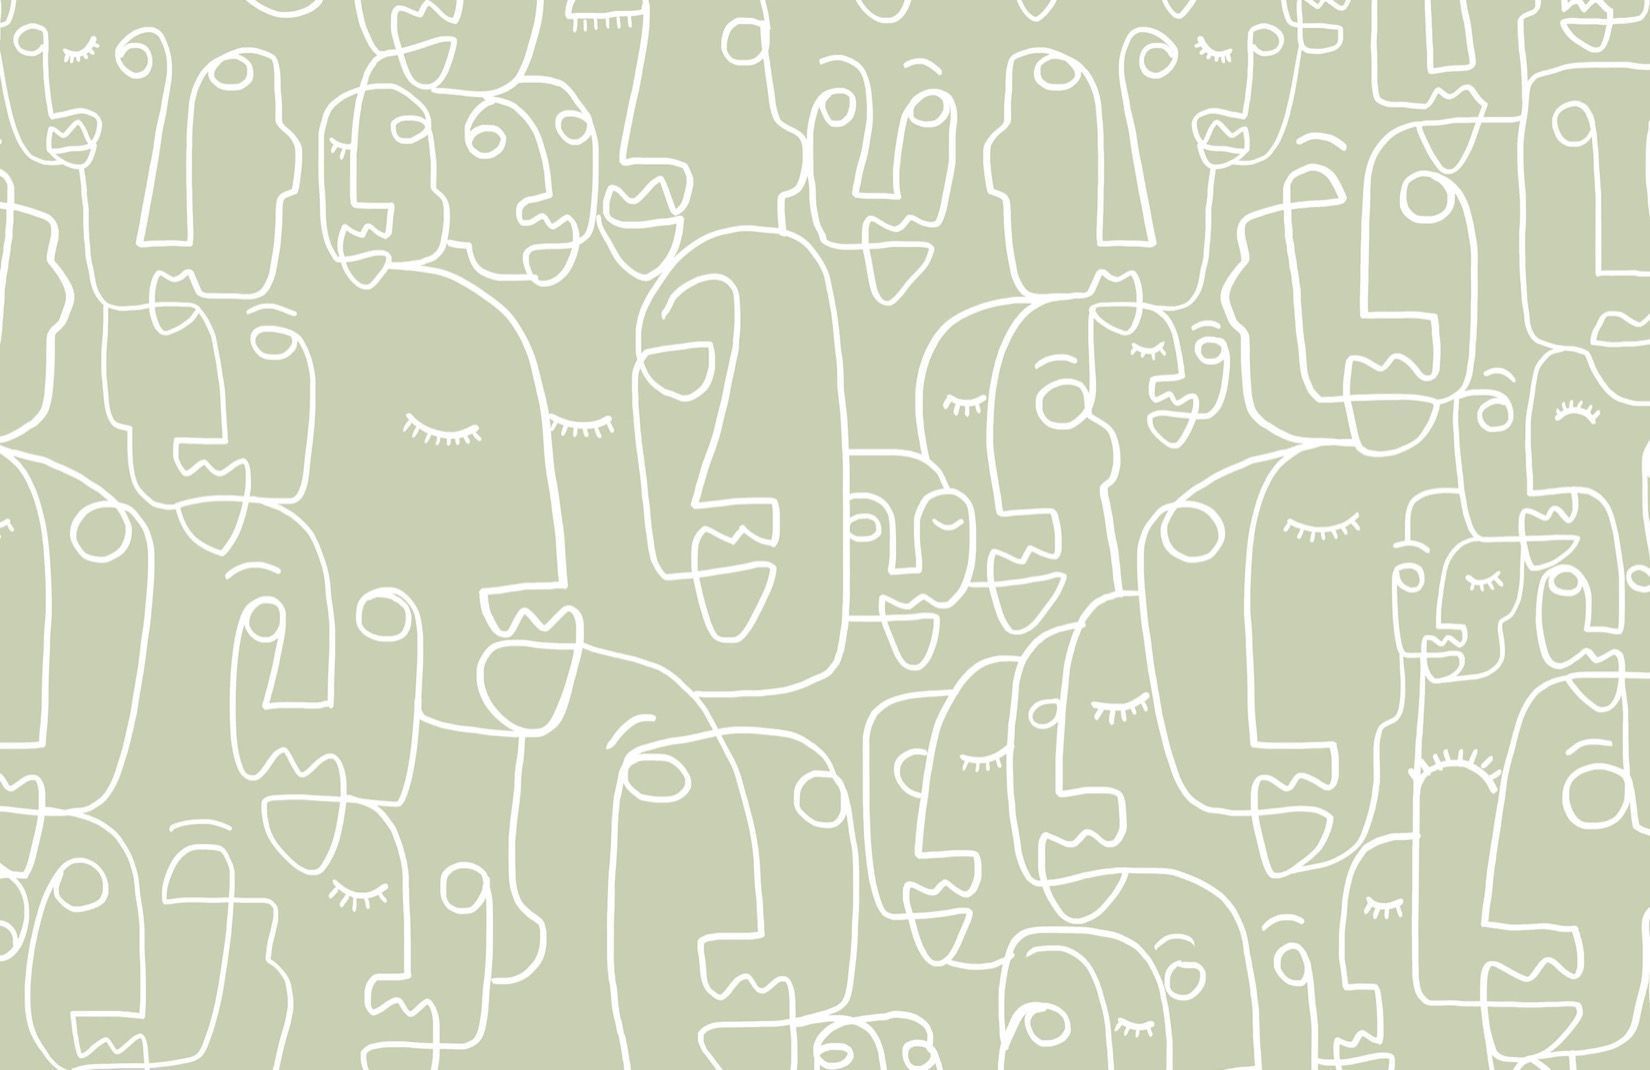 An abstract pattern of faces in white on a pale green background - Sage green